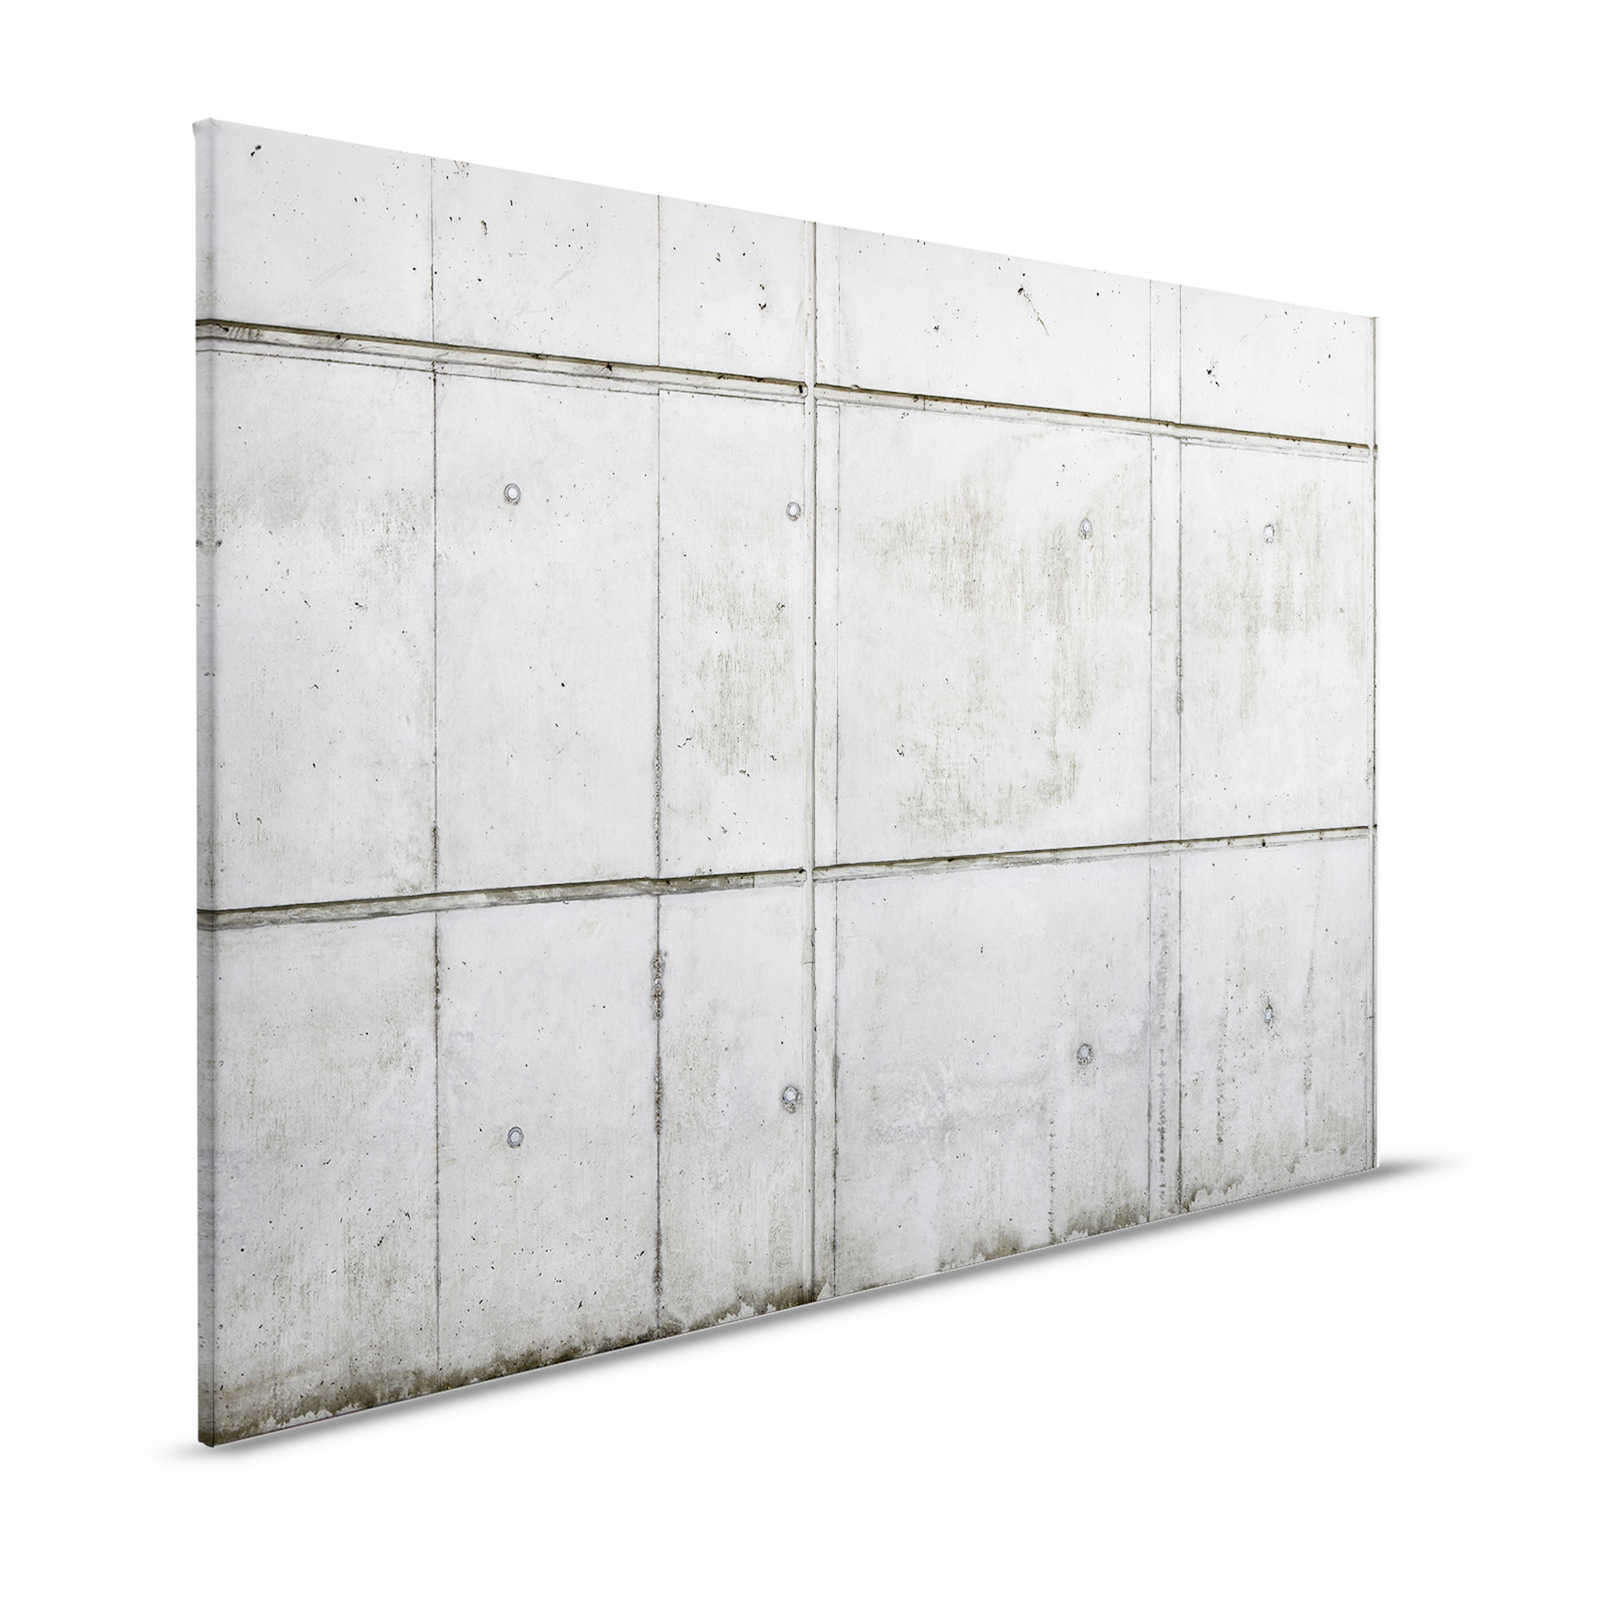 Canvas painting Scarf concrete 3D look in used look - 1.20 m x 0.80 m
